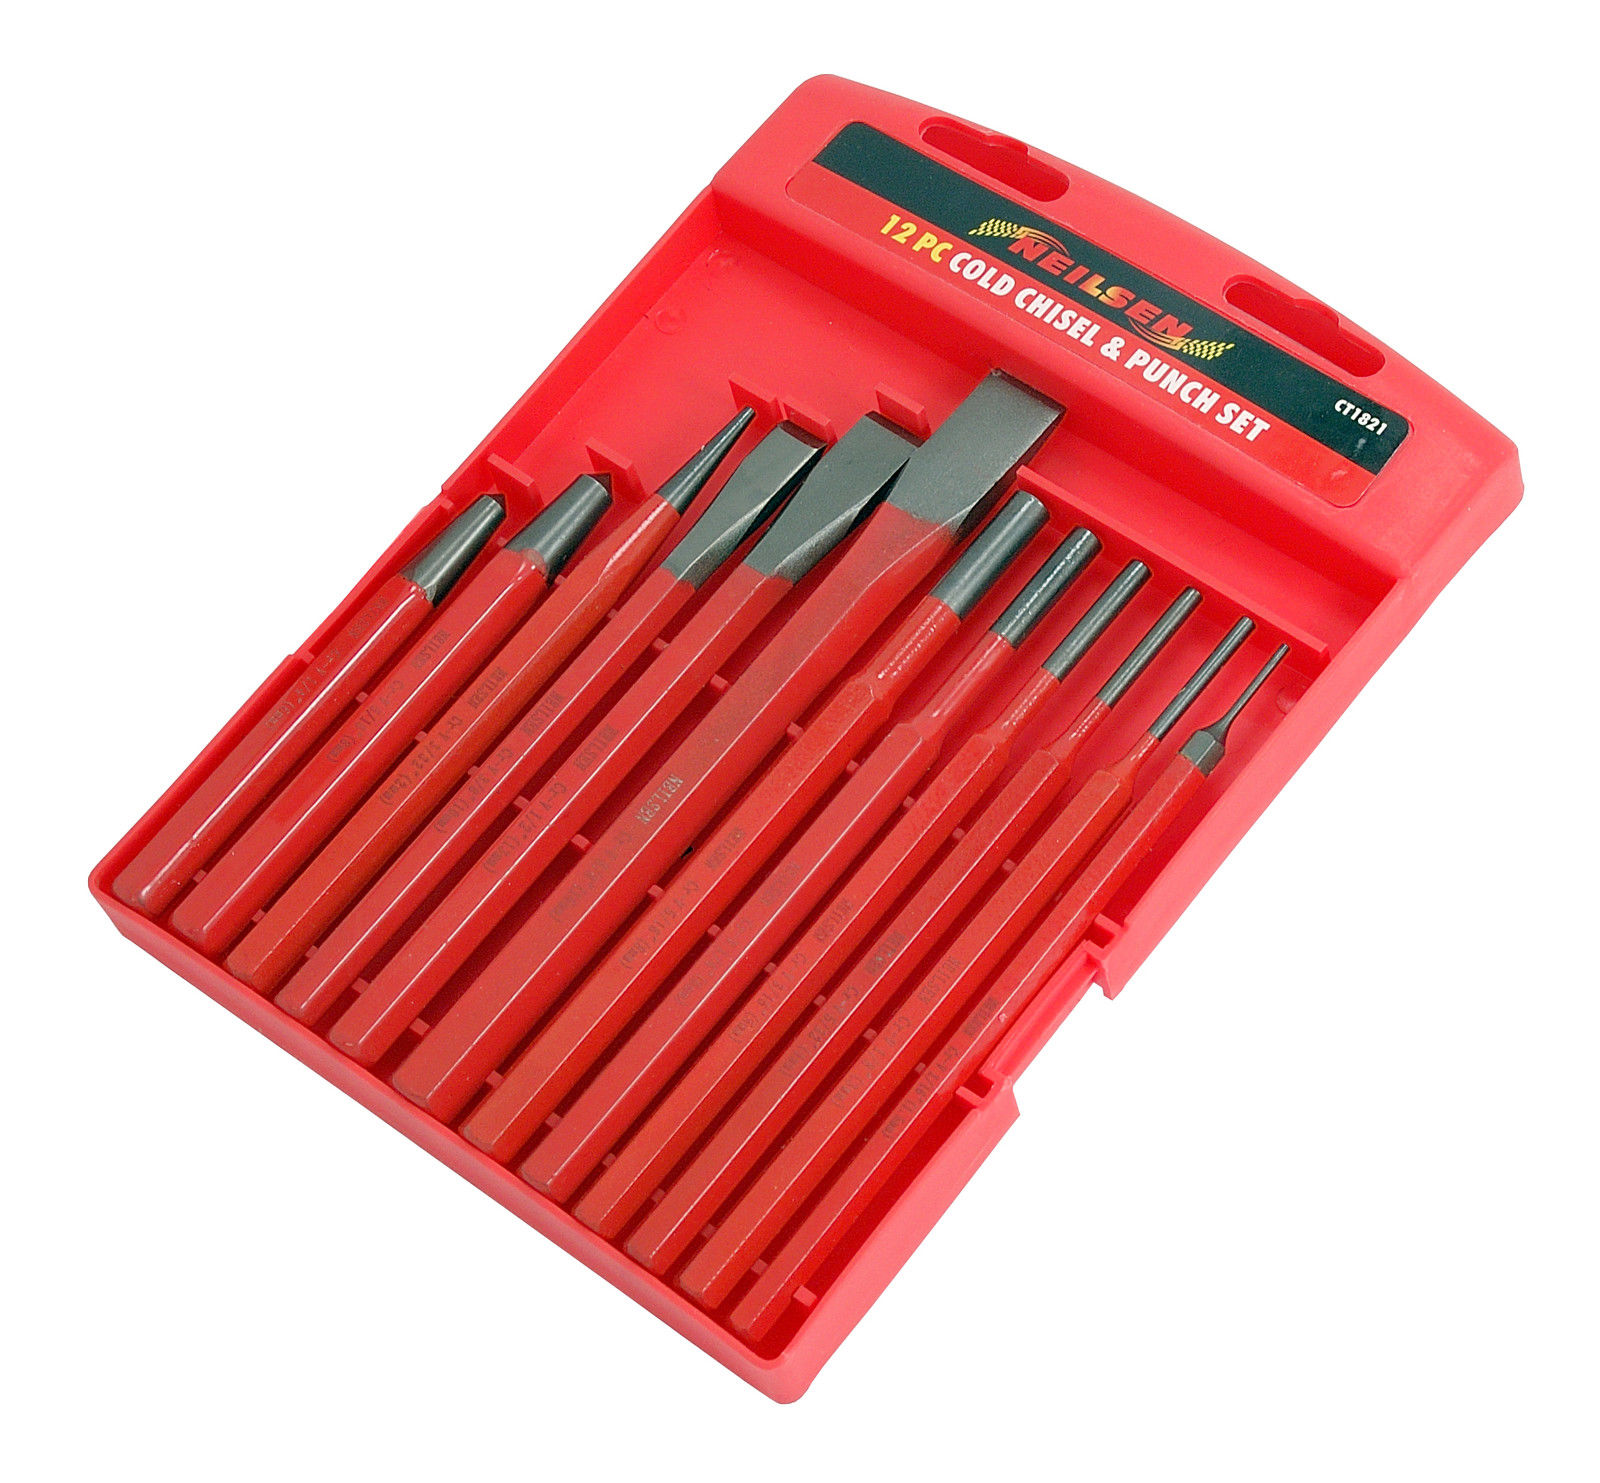 12pc Cold Chisel, Centre Pin Punch & Tapered Punches Set & Storage Tray